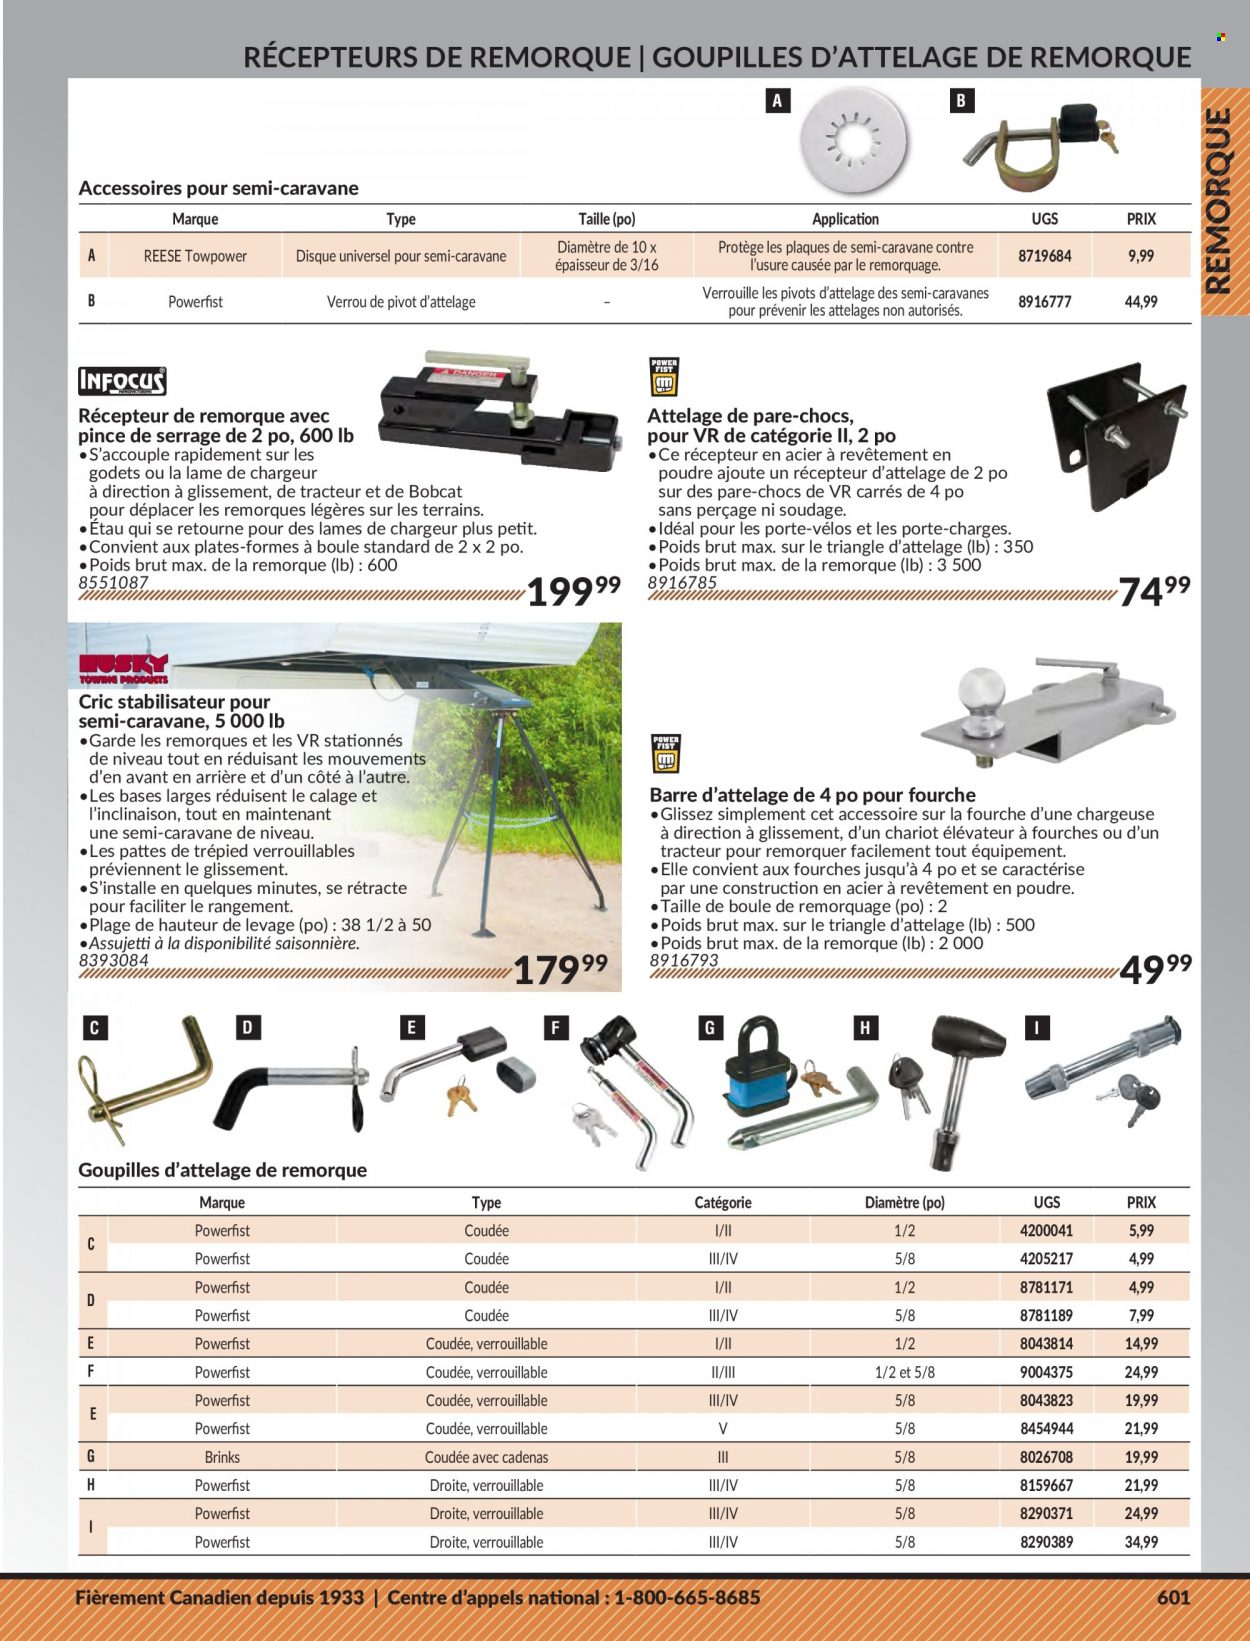 thumbnail - Princess Auto Flyer - Sales products - Reese Towpower. Page 611.